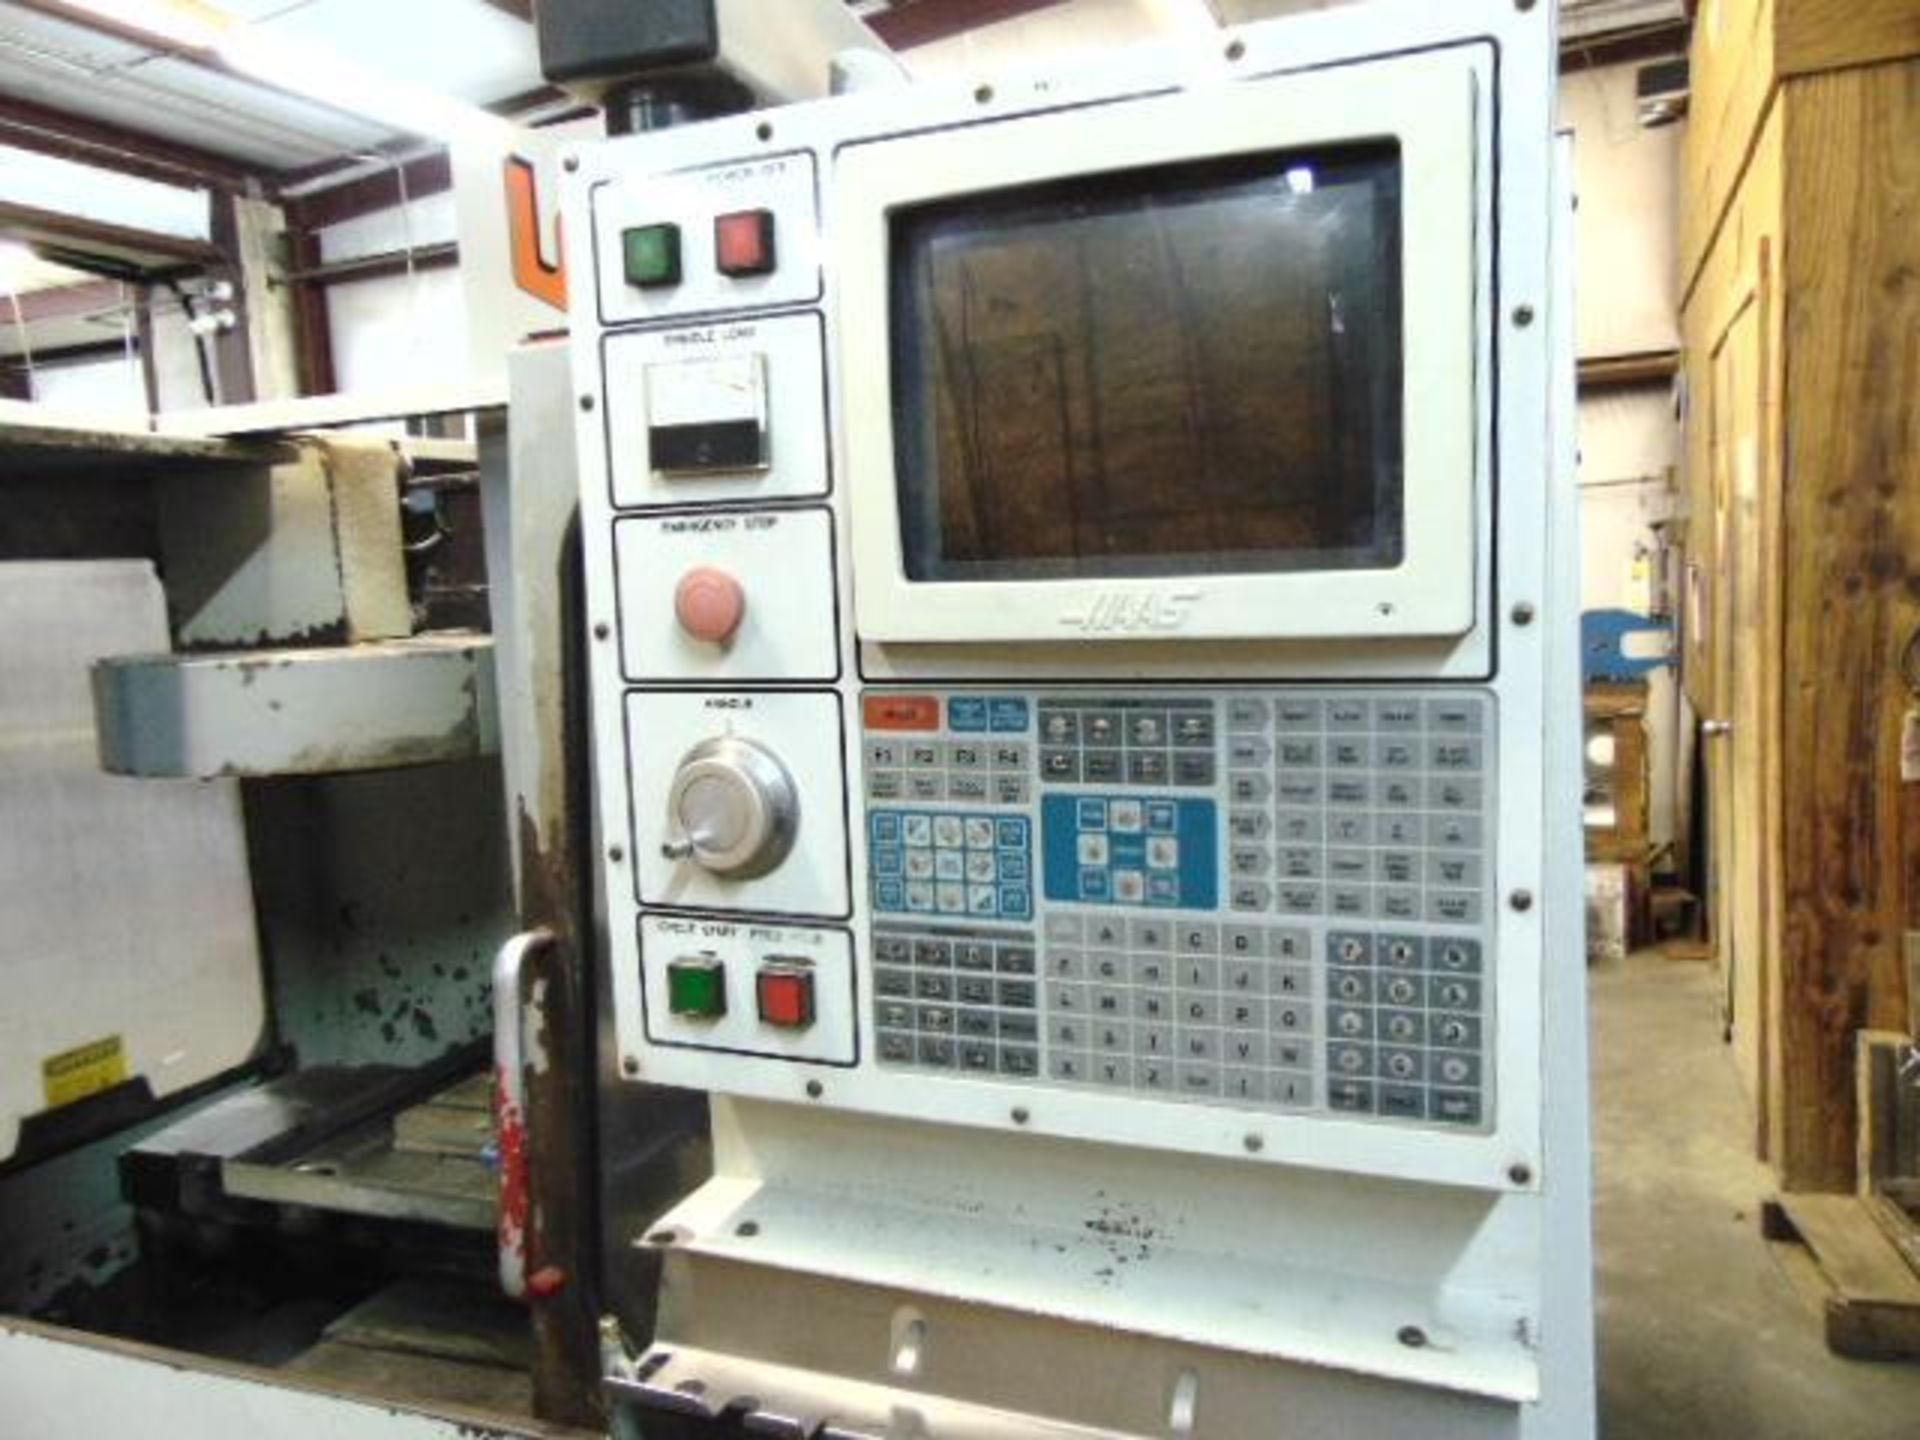 4-AXIS VERTICAL MACHINING CENTER, HAAS MDL. VF1, new 1996, 26" x 14" tbl. size, 20" X, 16" Y, 20" Z- - Image 2 of 10